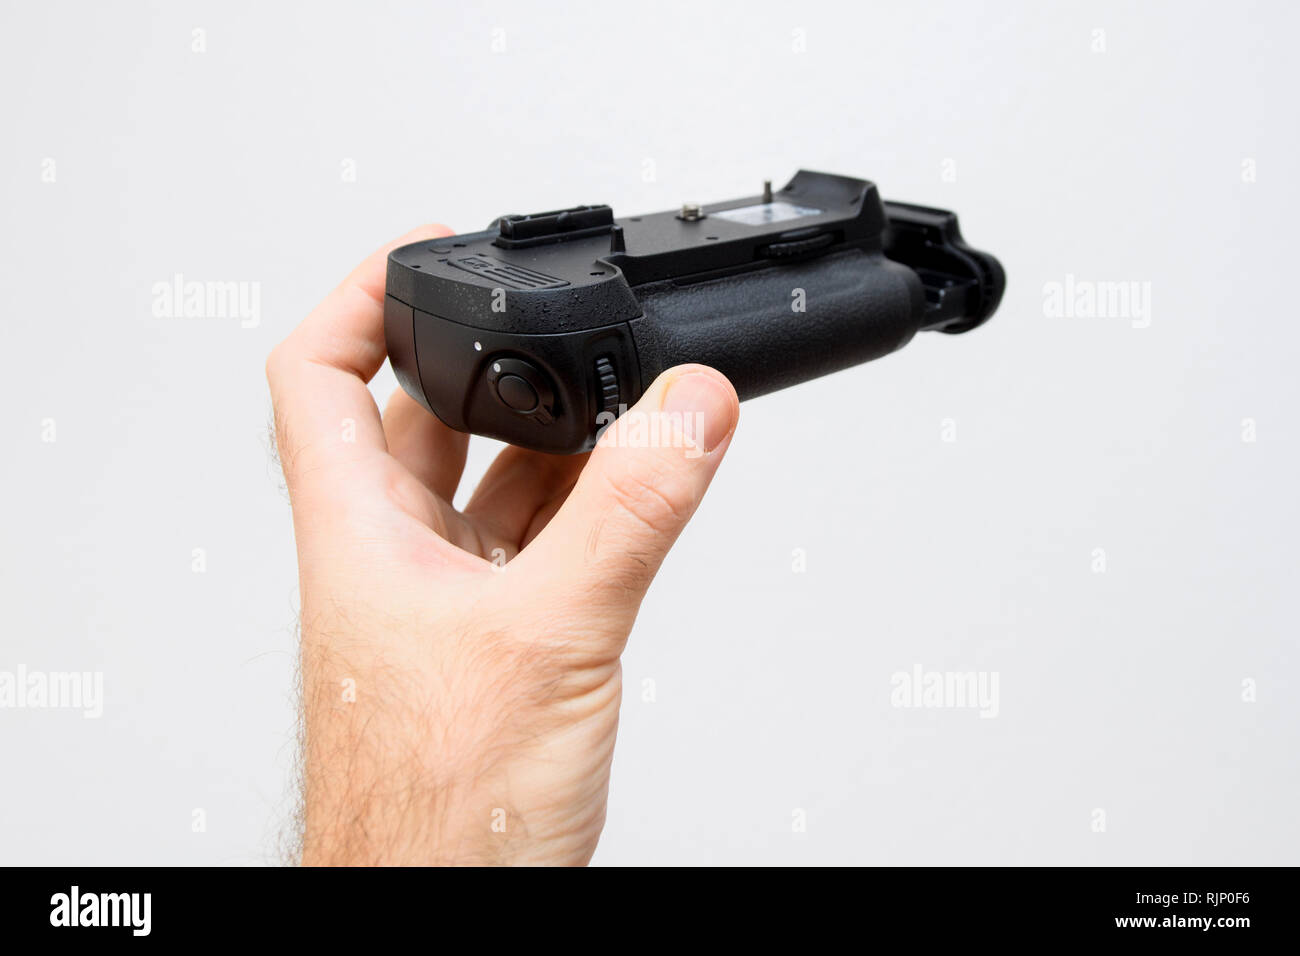 Photographer hand holding against white background a battery camera grip for his new camera Stock Photo